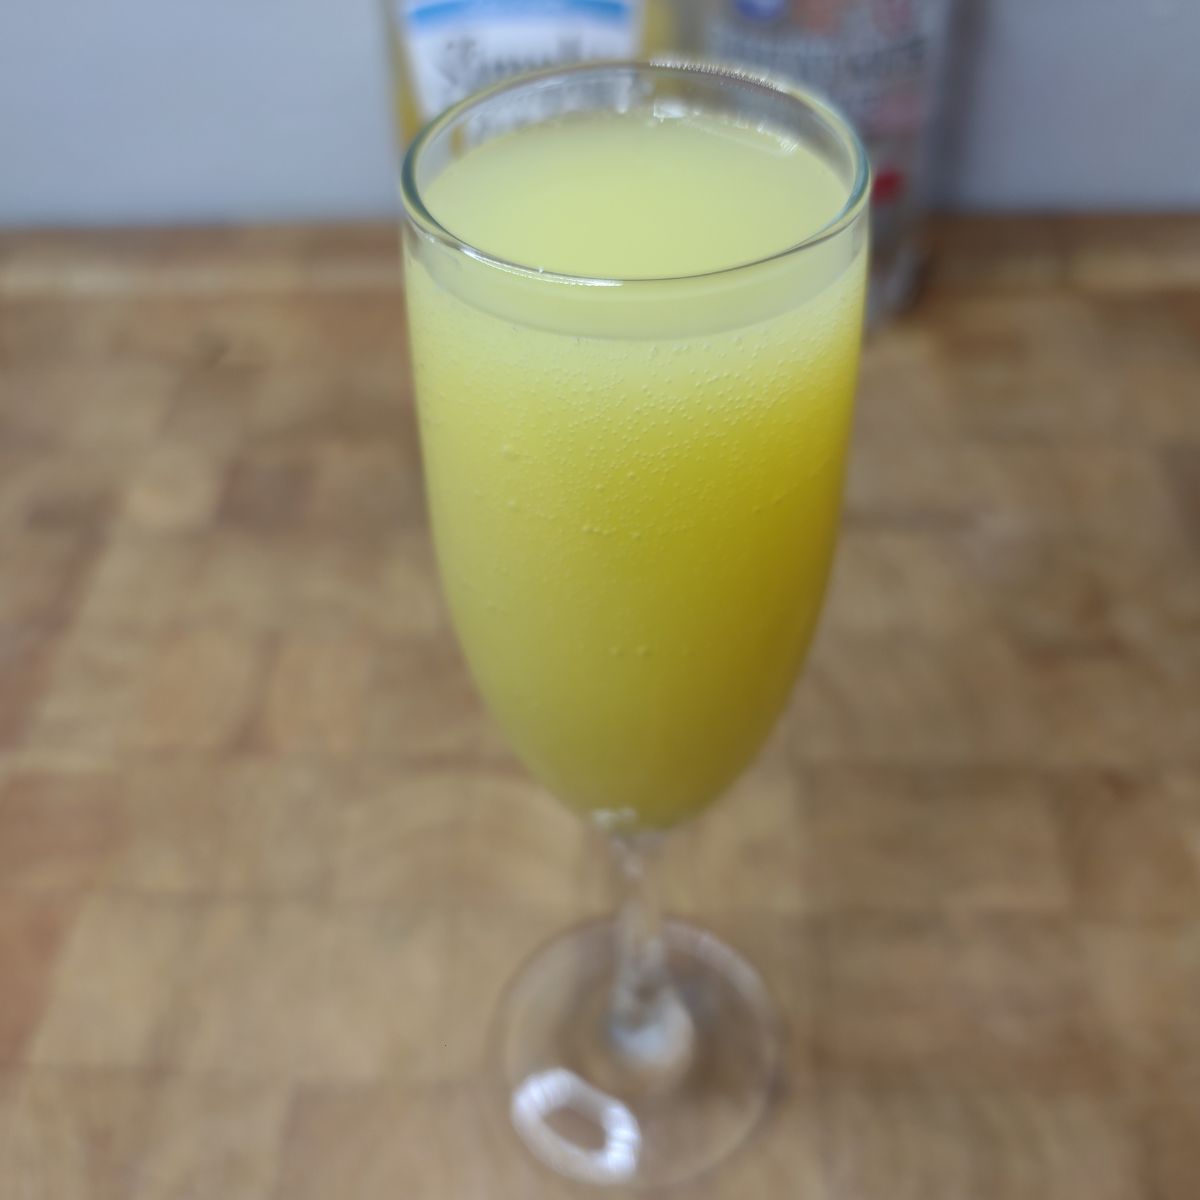 Virgin Mimosa in a champagne flute and ingredients in the background.